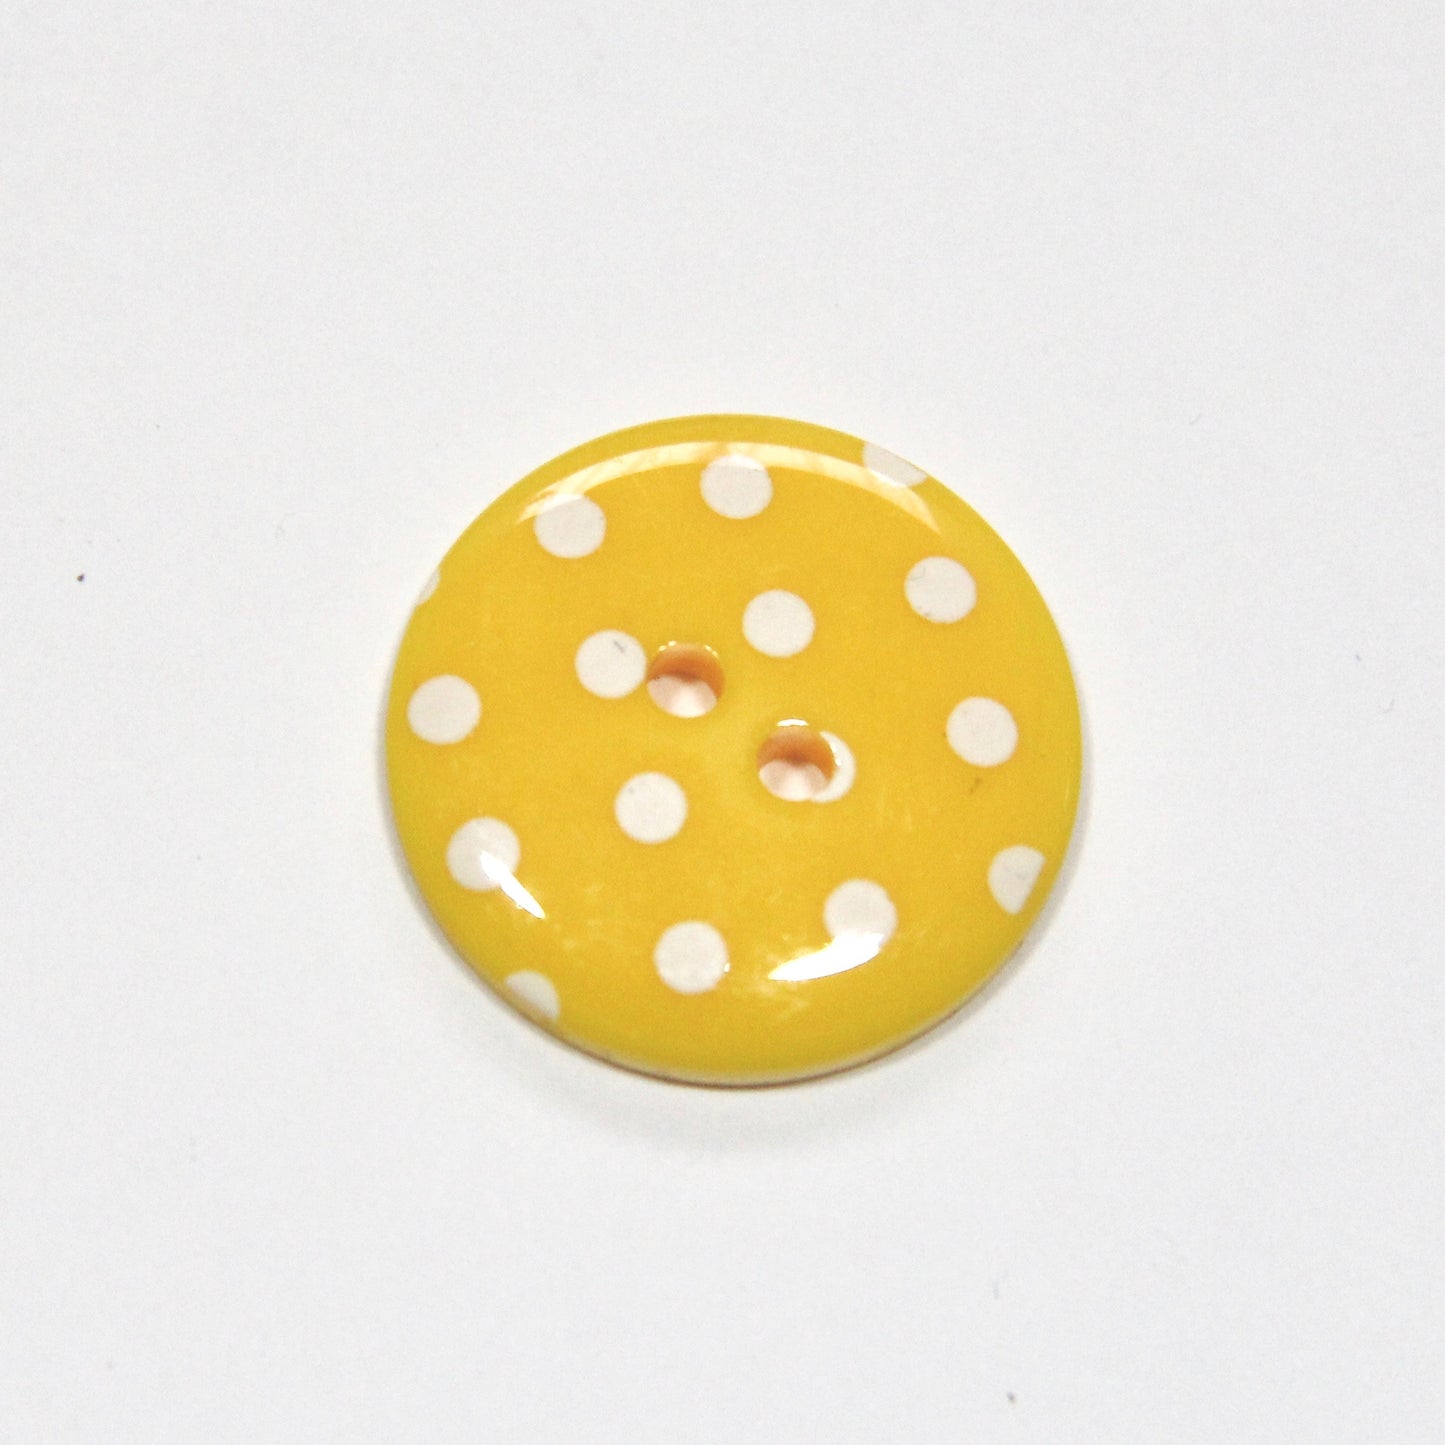 13mm  Fine Style Polka Dot Buttons